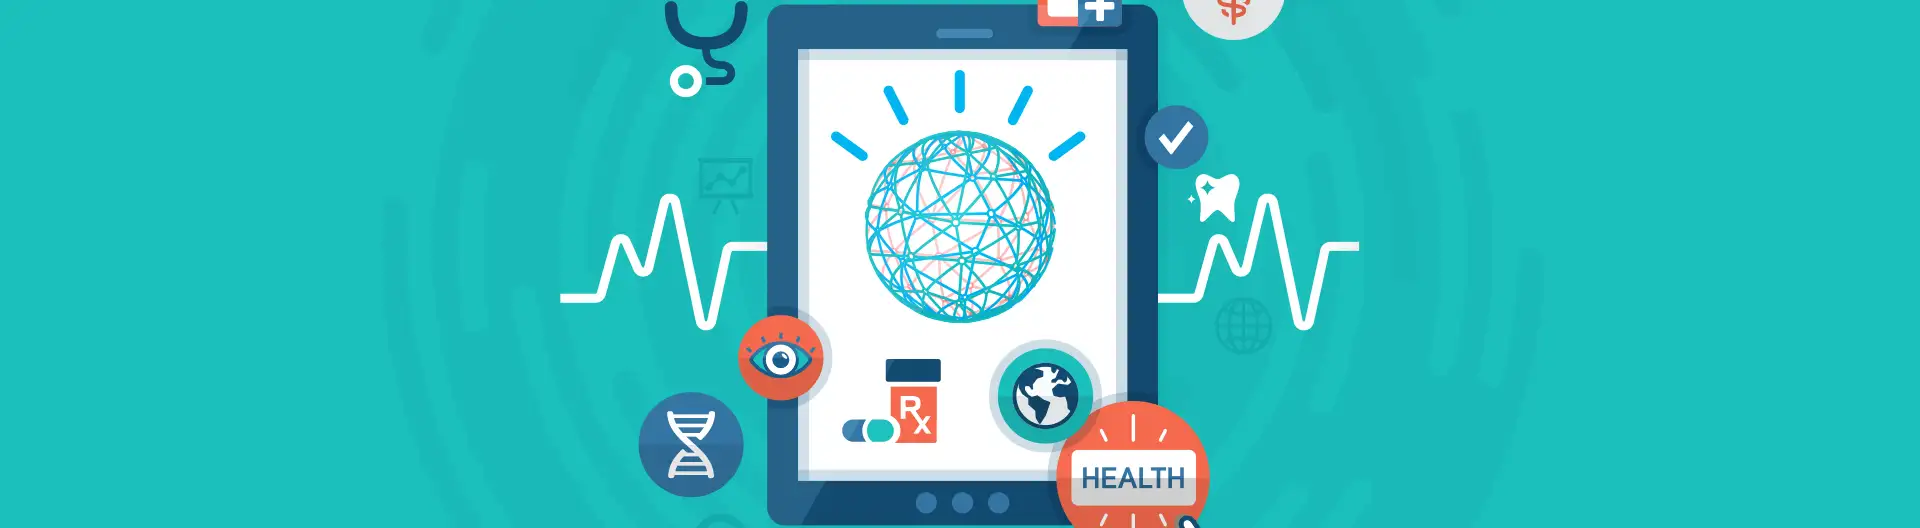 How IBM Watson Can Change Healthcare in the Near Future - Banner